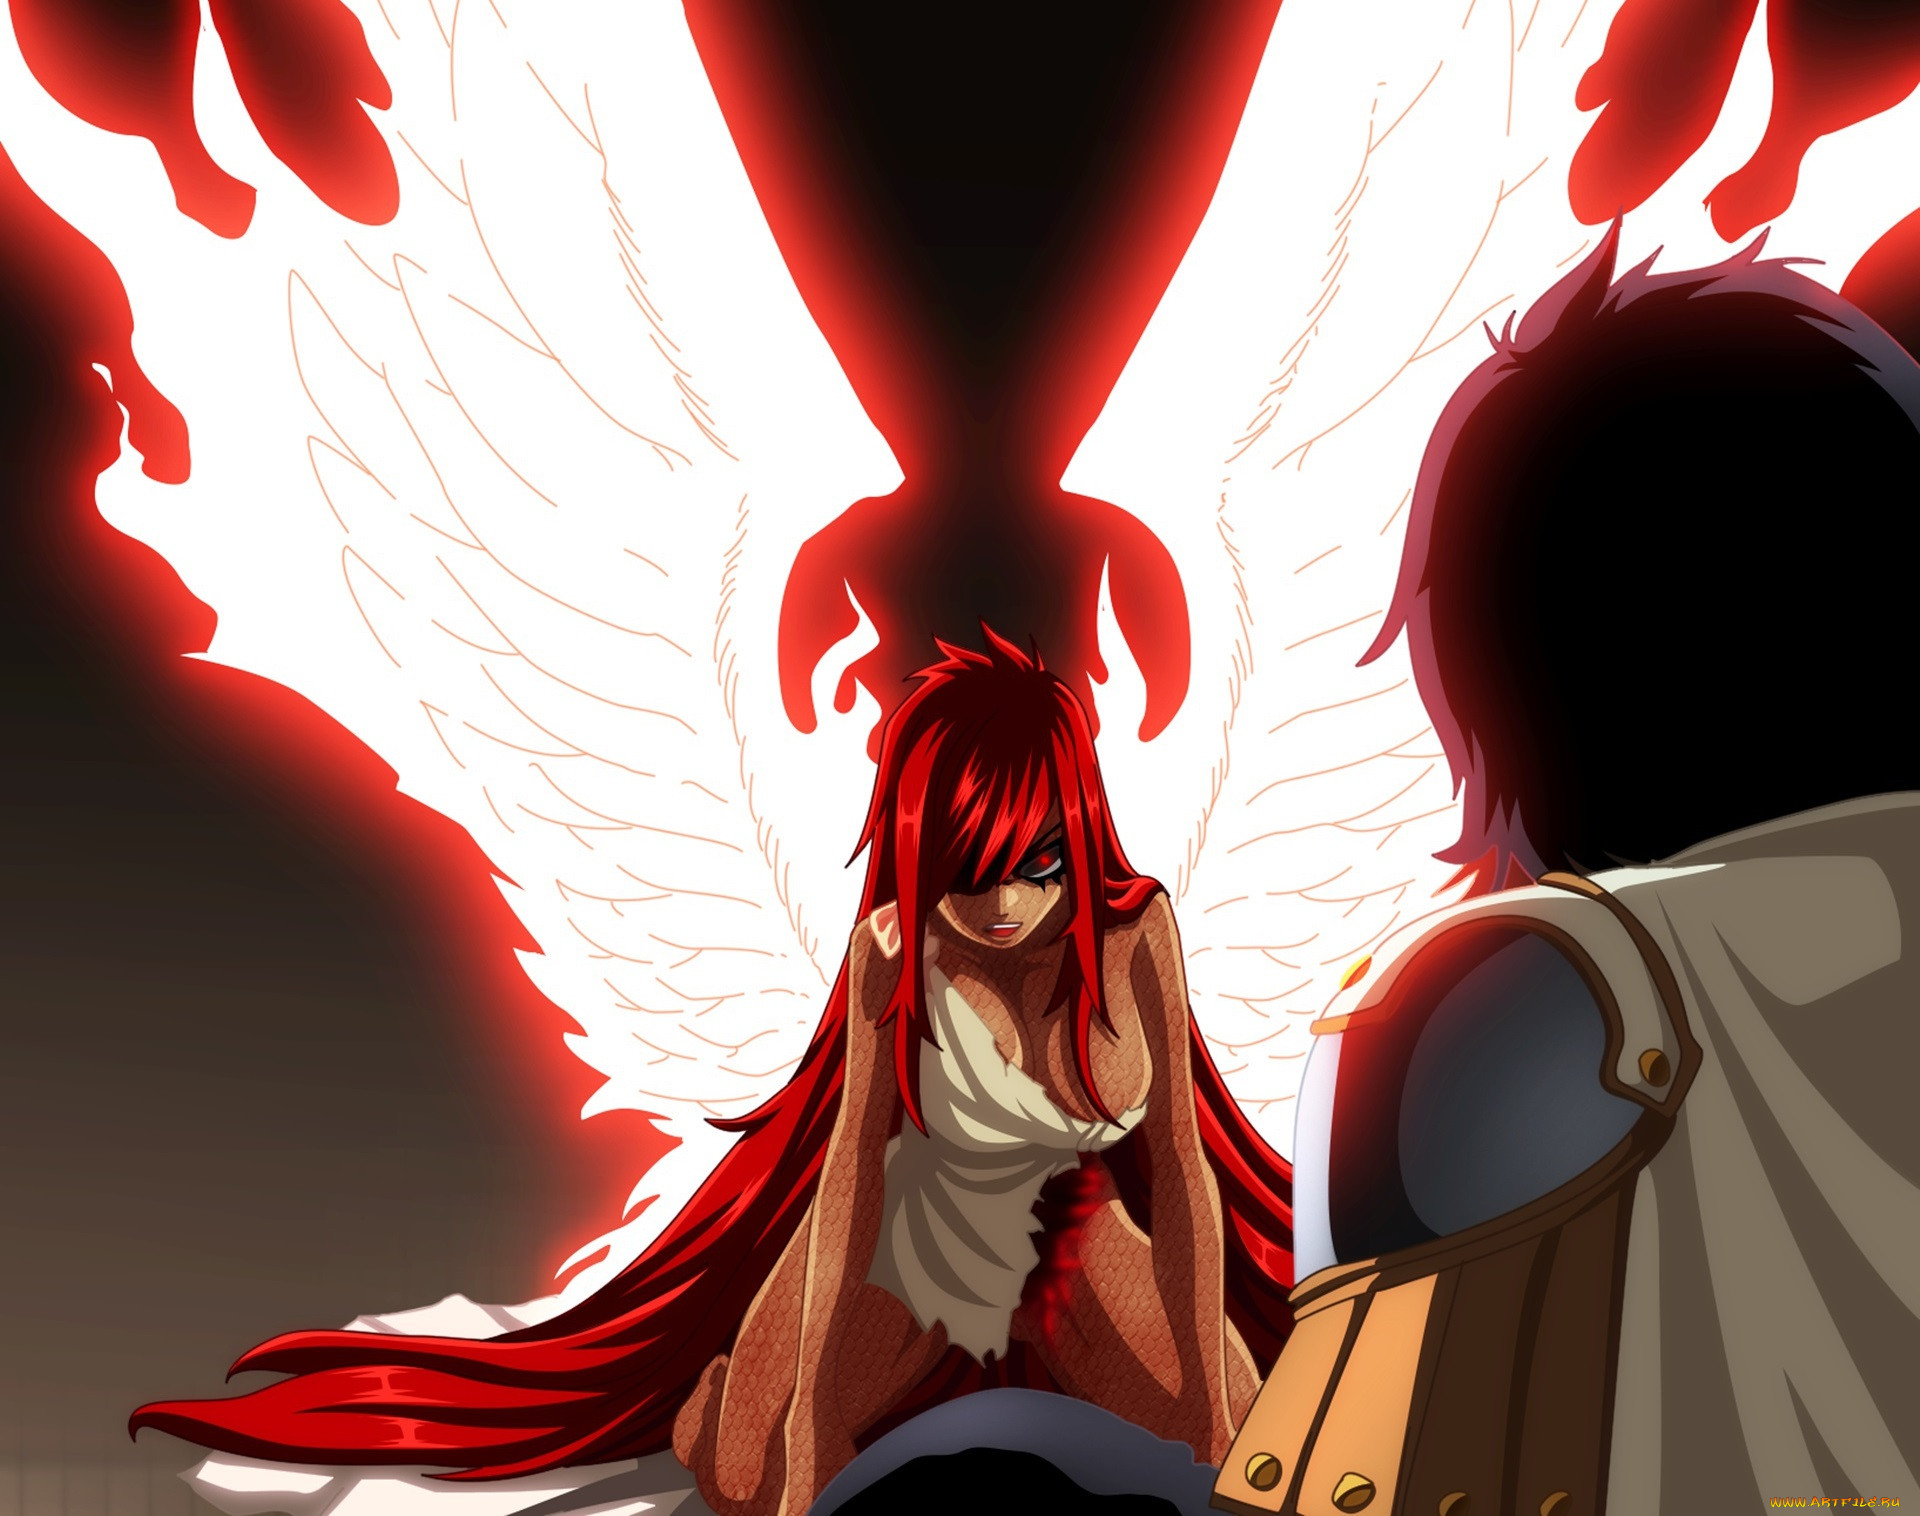 , fairy tail, dress, girl, manga, red, redhead, man, pretty, by, animefanno1, strong, eyes, wings, anime, oppai, fairy, tail, hair, game